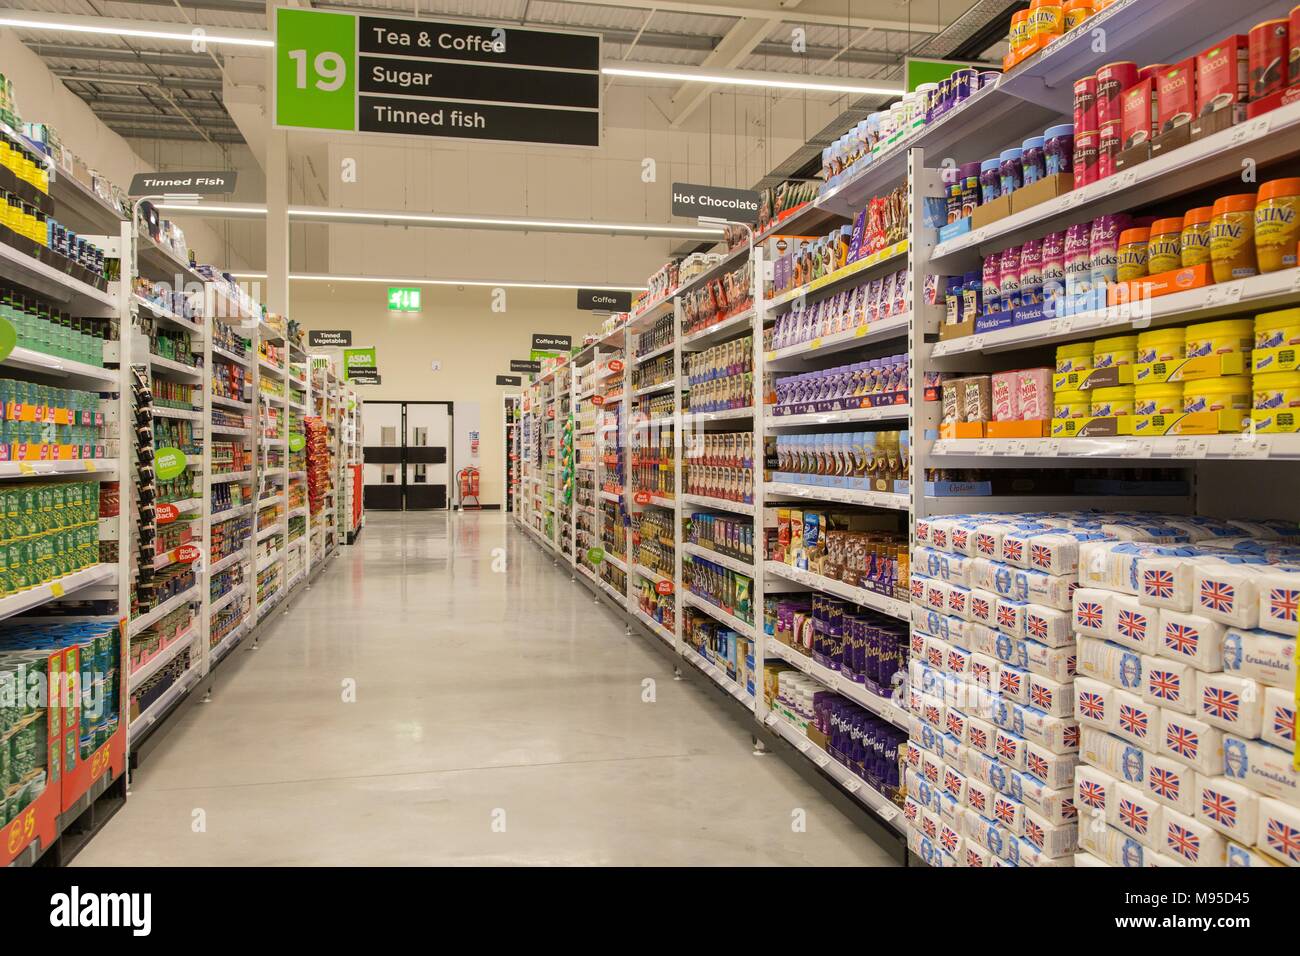 Tea and coffee, sugar,ovaltine,horlicks,tinned canned fish on full shelves in an Asda supermarket. Stock Photo